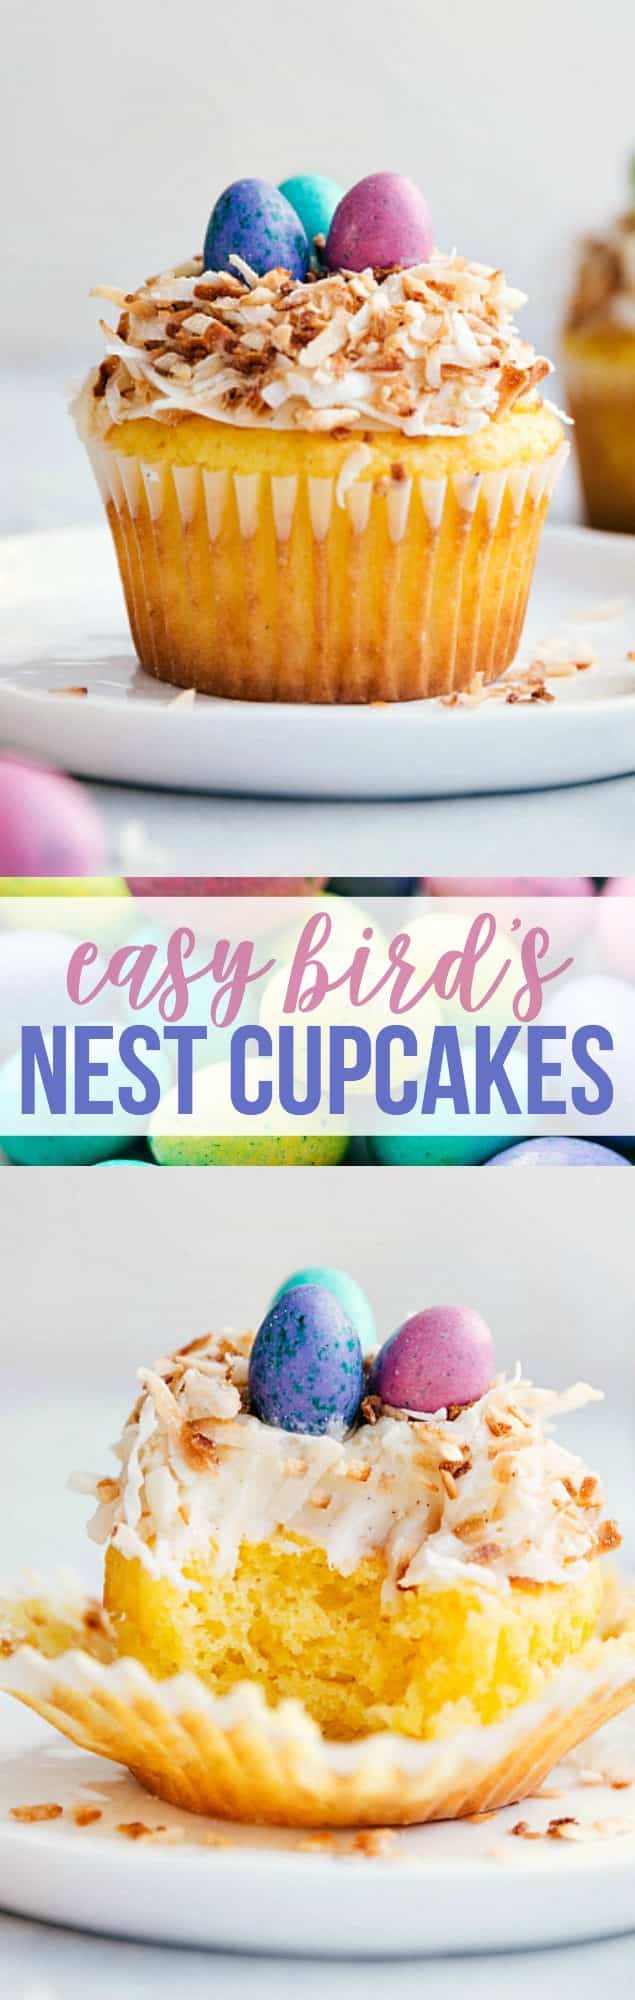 BIRDS NEST CUPCAKES! Yellow cupcakes topped with the best cream cheese frosting, toasted coconut, and M&Ms to create the cutest (and easiest) Easter treat! These bird's nest cupcakes are so simple to make. chelseasmessyapron.com #easter #cupcake #cream #cheese #frosting #bird #nest